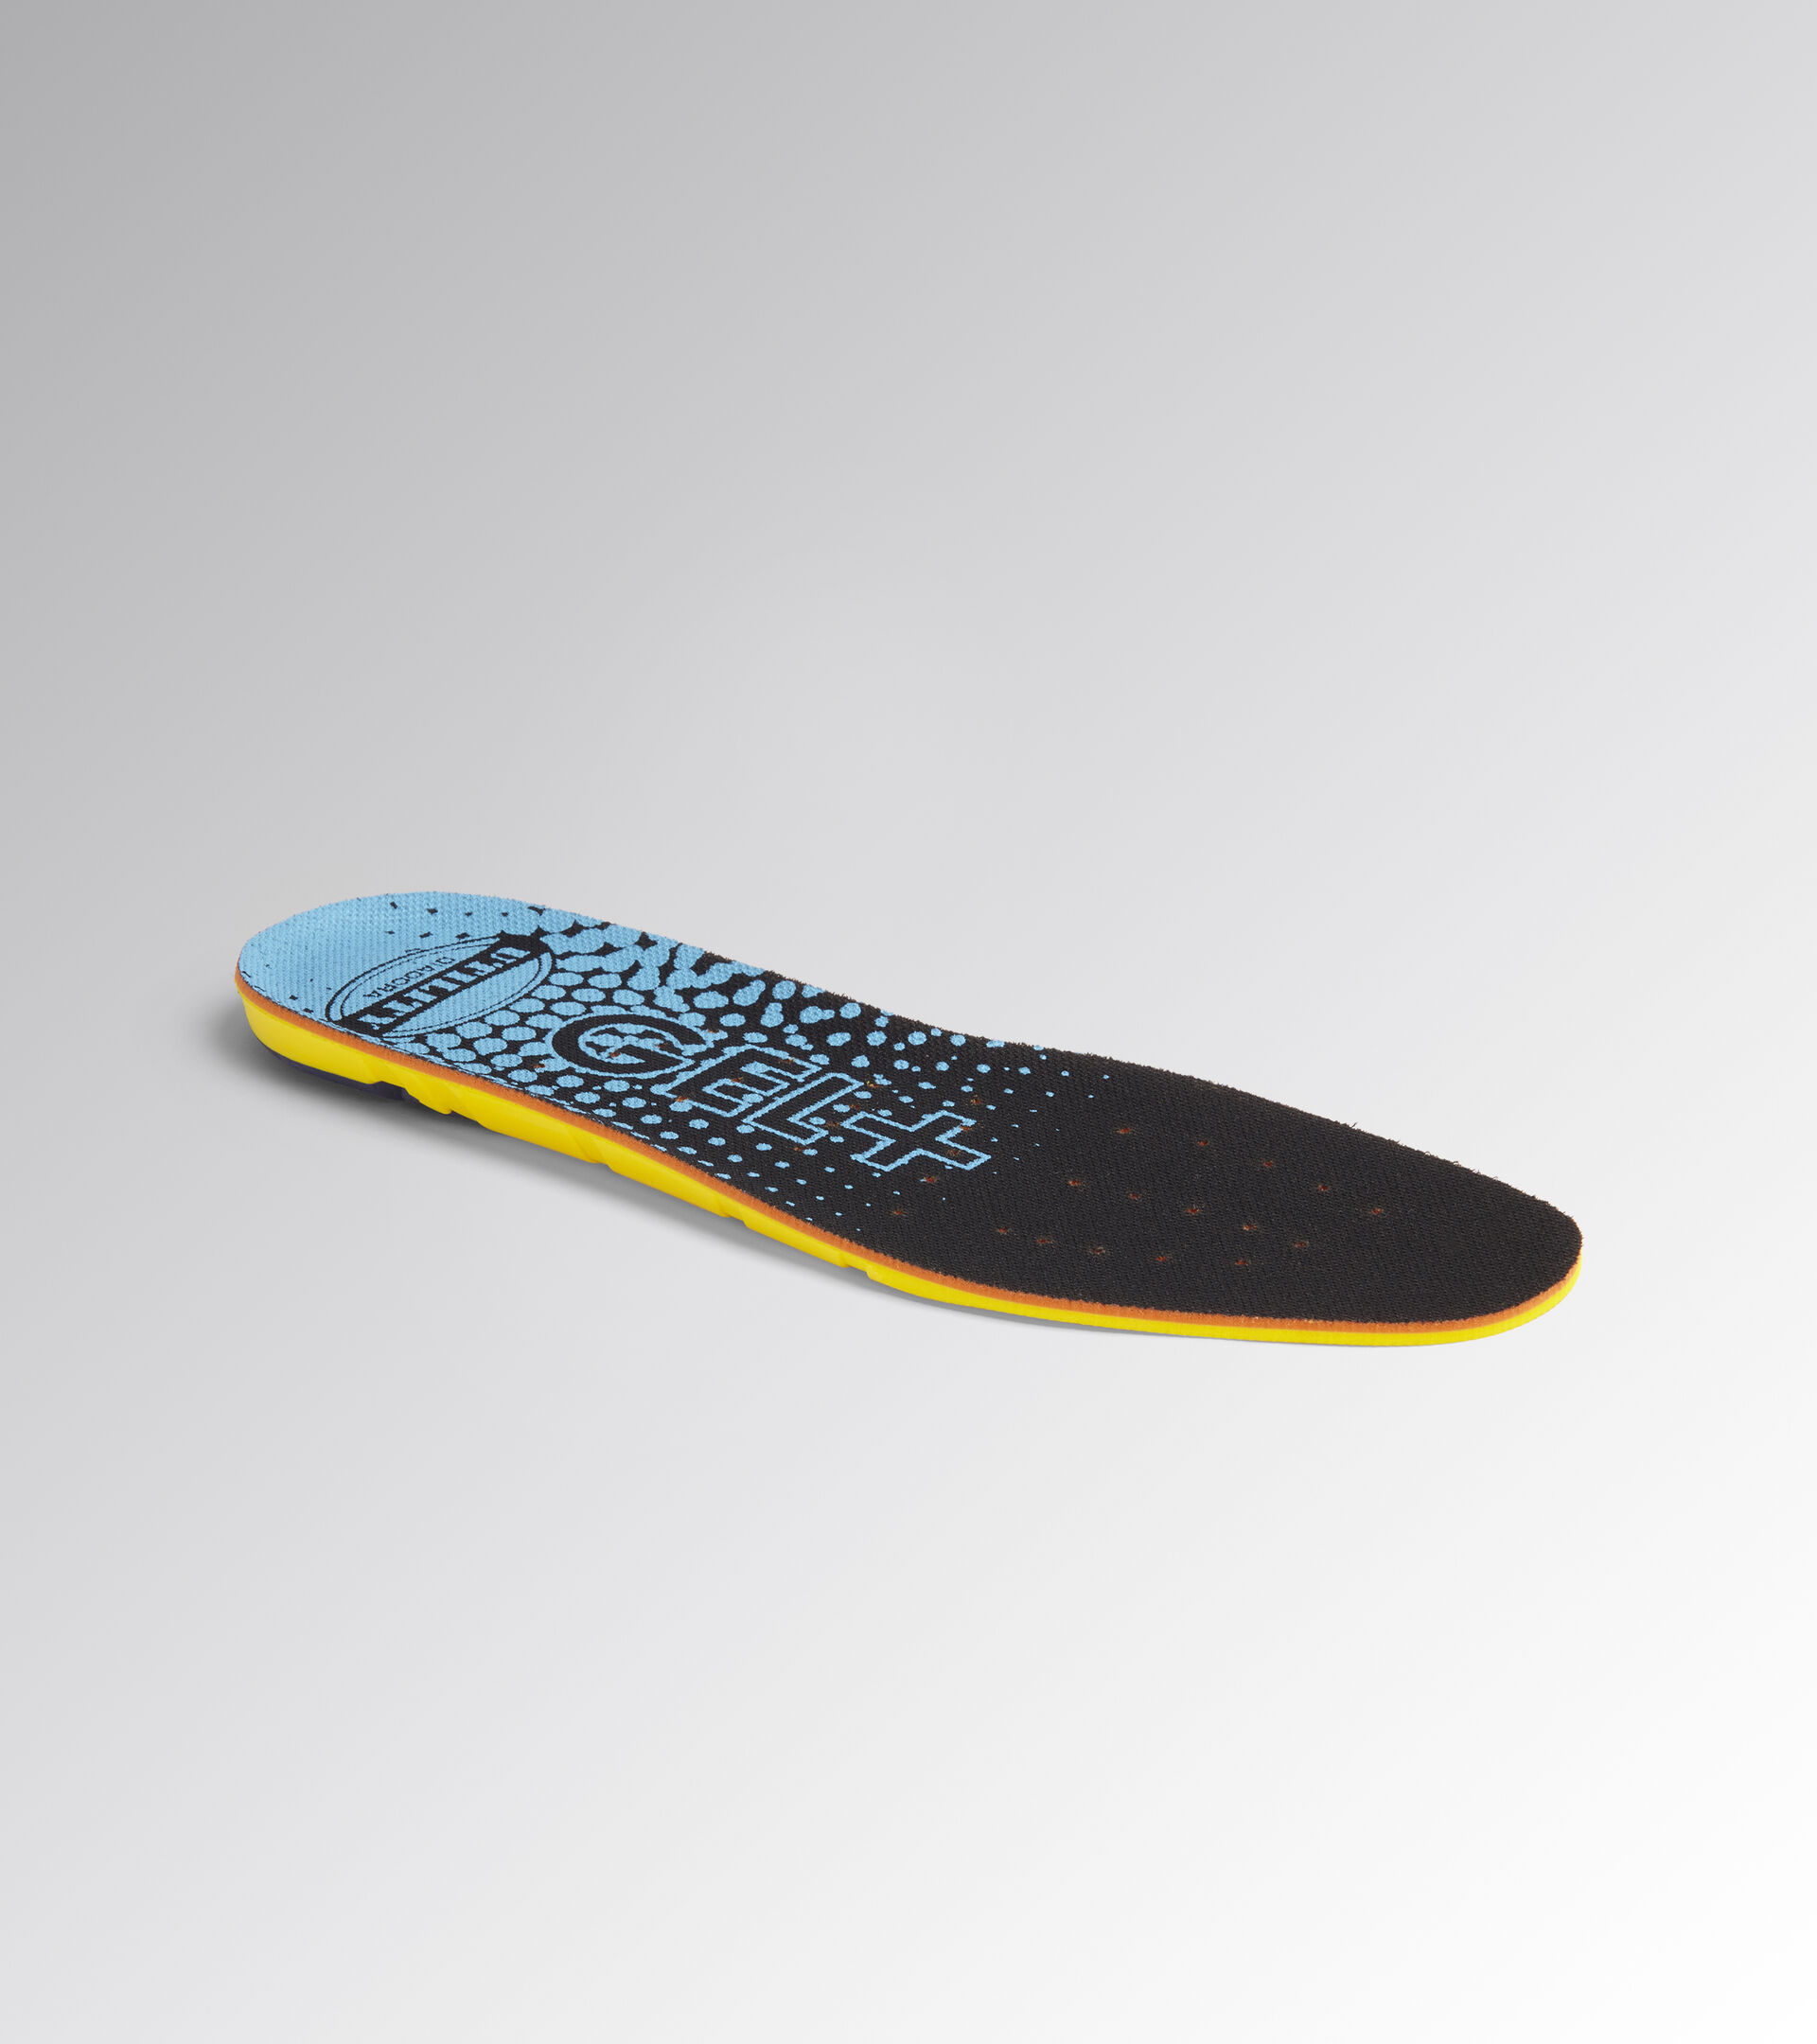 Insoles for Utility shoes INSOLE GEL PERFORMANCE SKY BLUE/YELLOW UTILITY - Utility